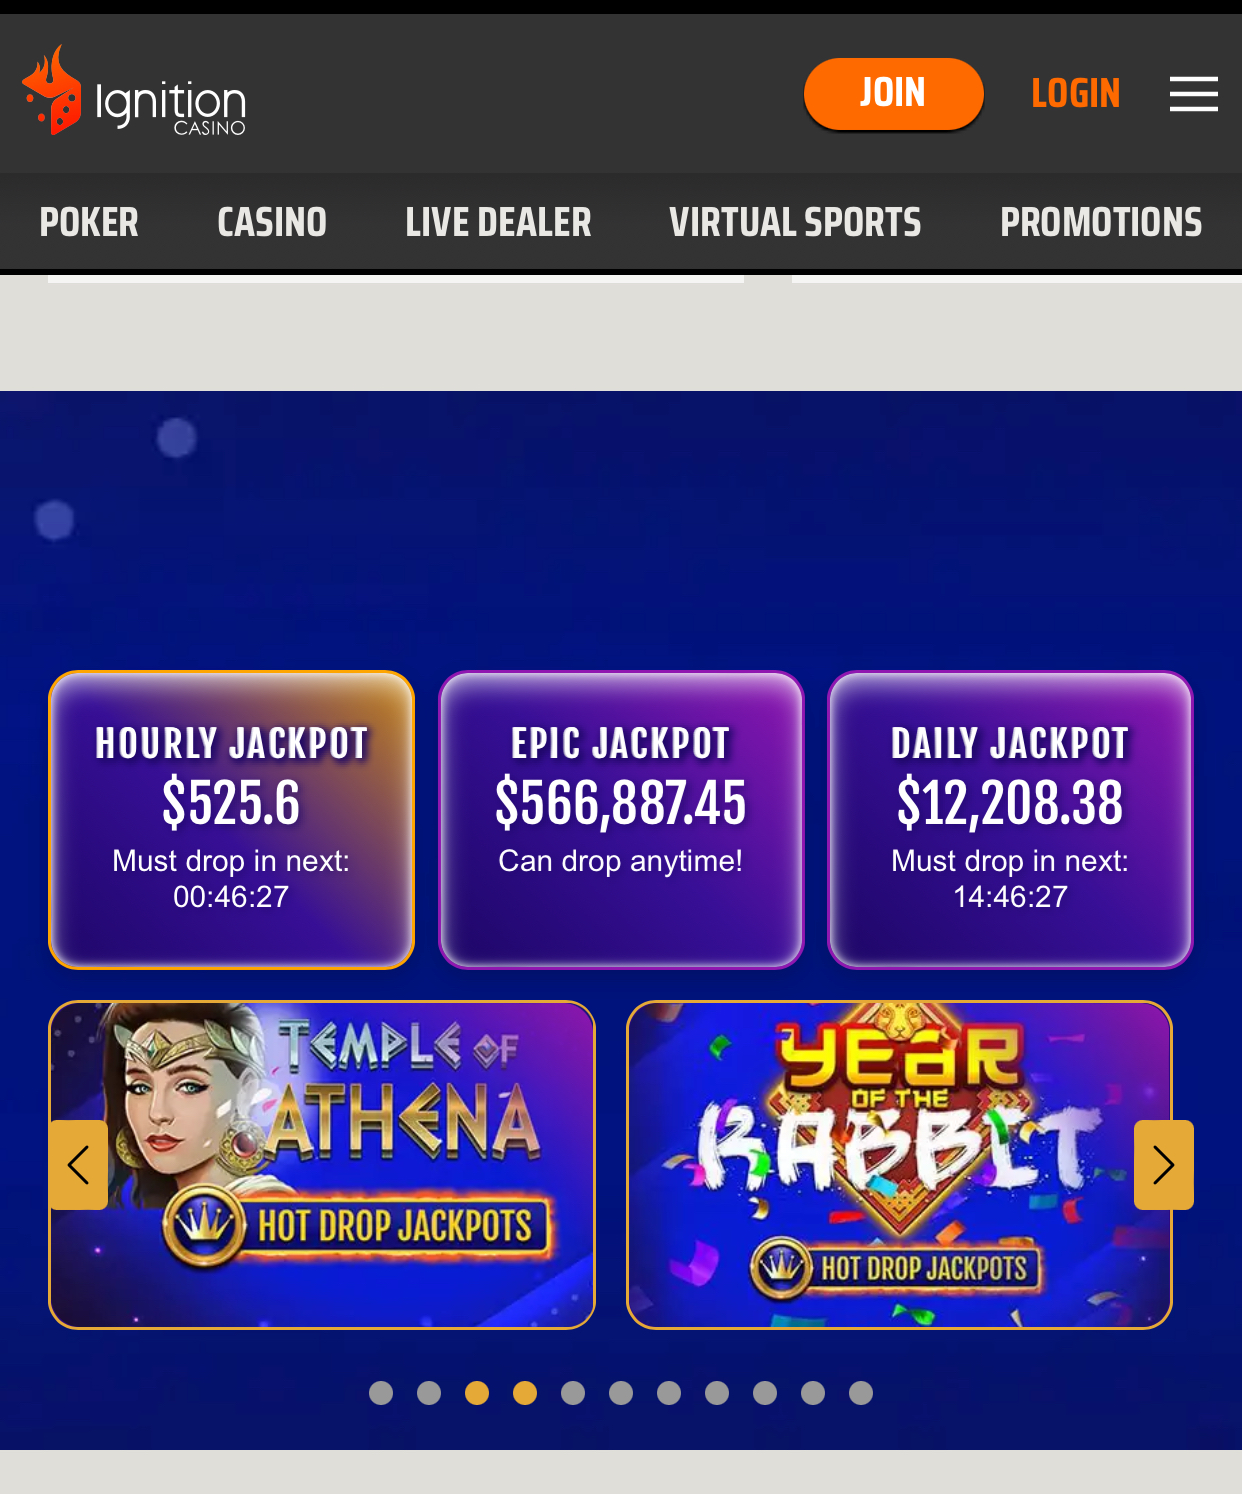 Mobile - Money - Website - payouts - bet - sites - money gambling - mobile ignition - money - site